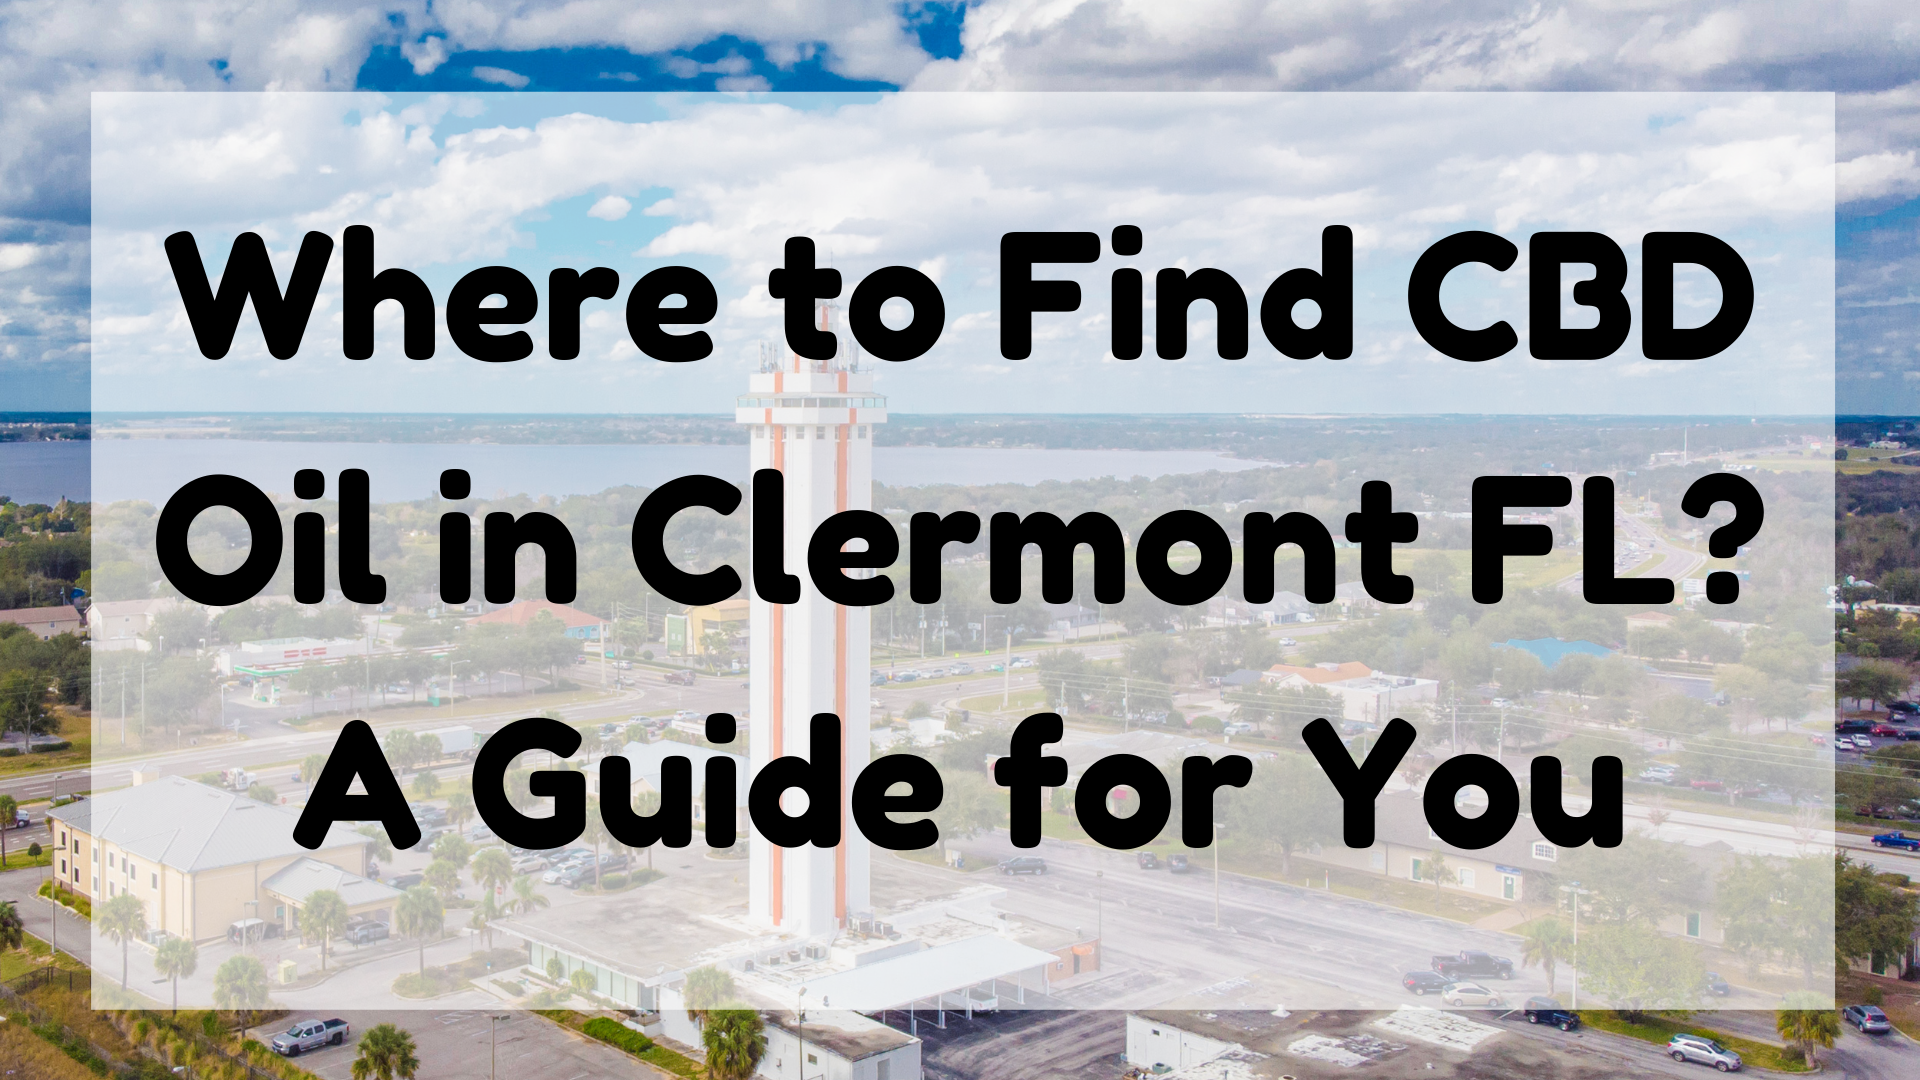 Where to Find CBD Oil in Clermont, FL?